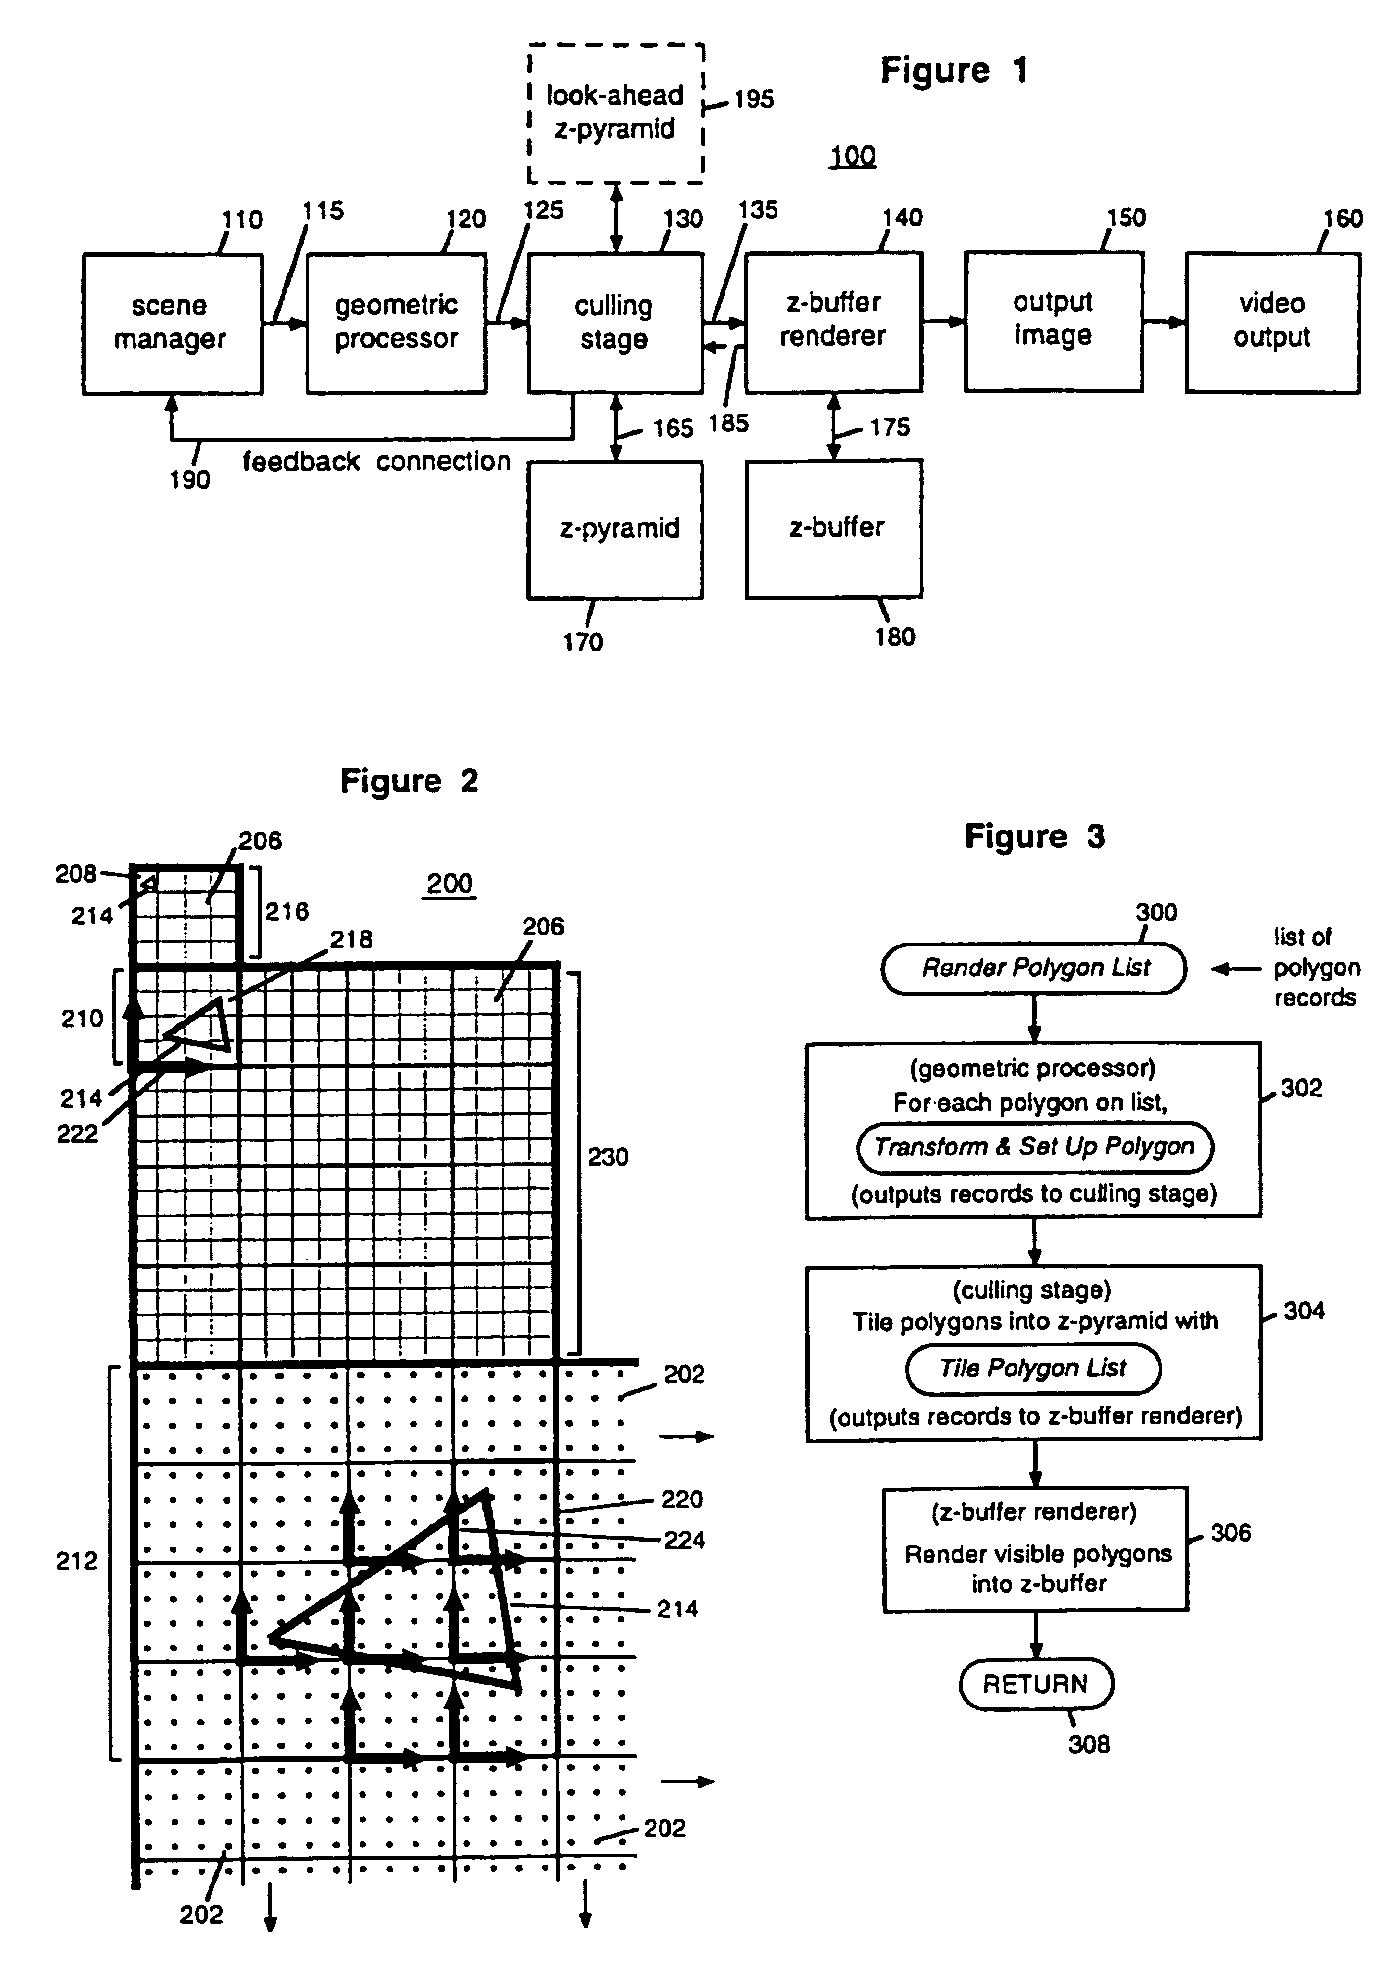 System and method for accelerating graphics processing using a post-geometry data stream during multiple-pass rendering